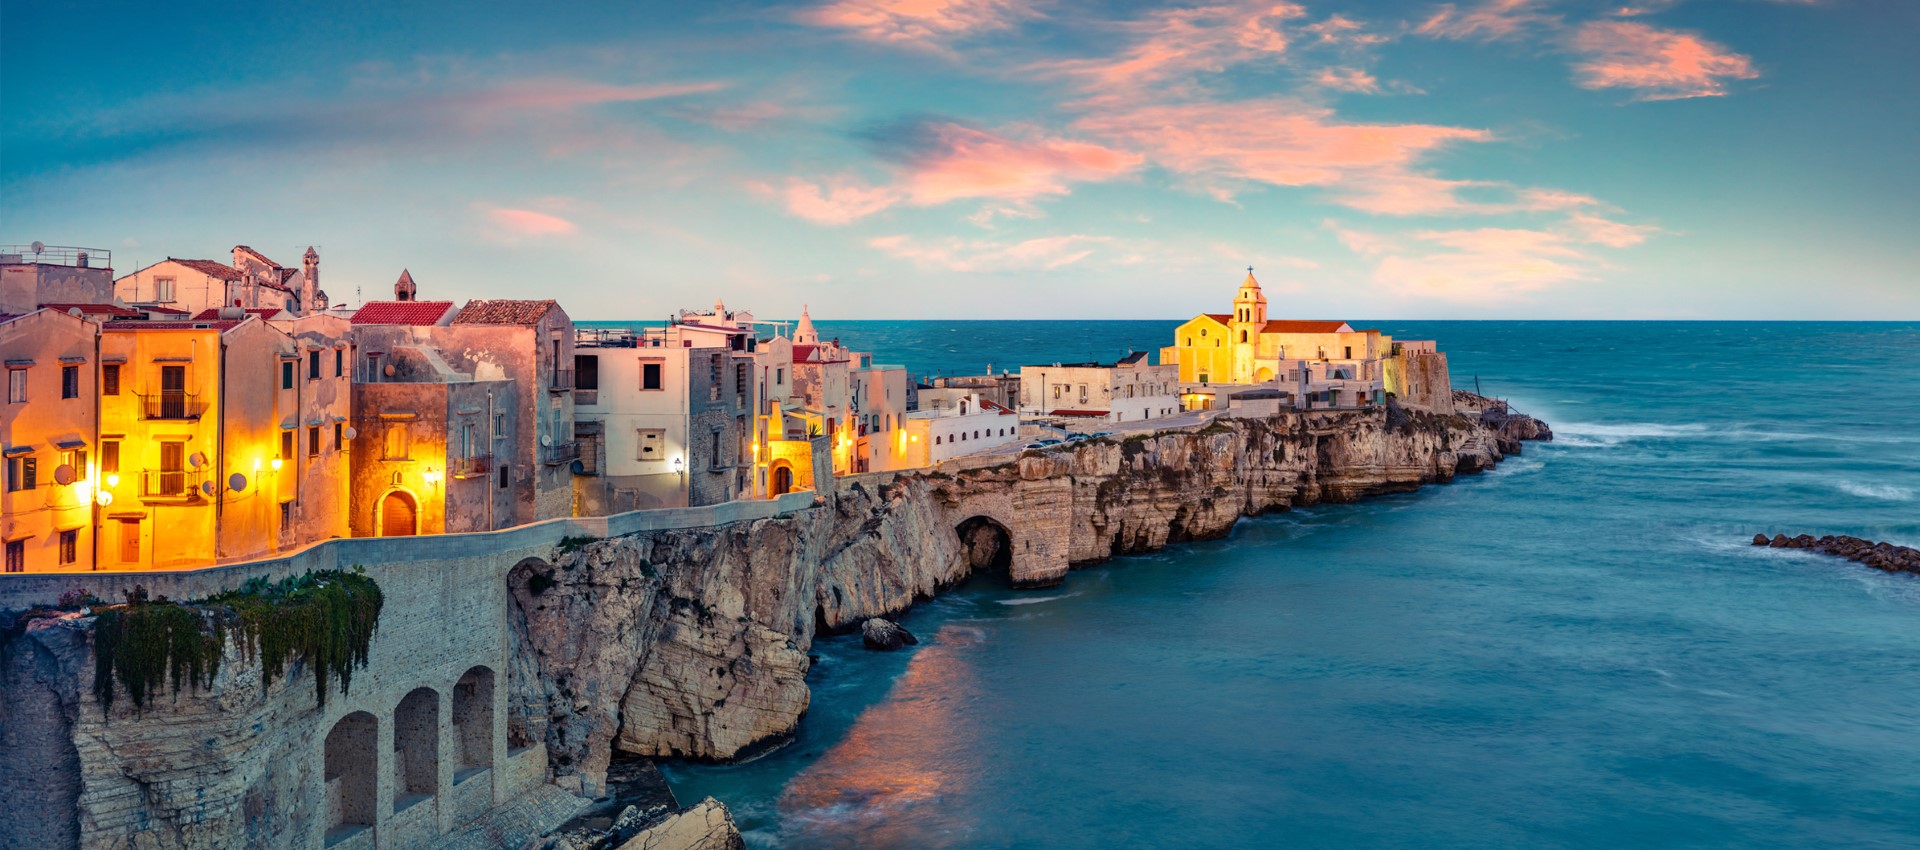 Luxury travel planning in Puglia, Italy by Bond, the award winning travel agent specialized in custom travels in Italy.